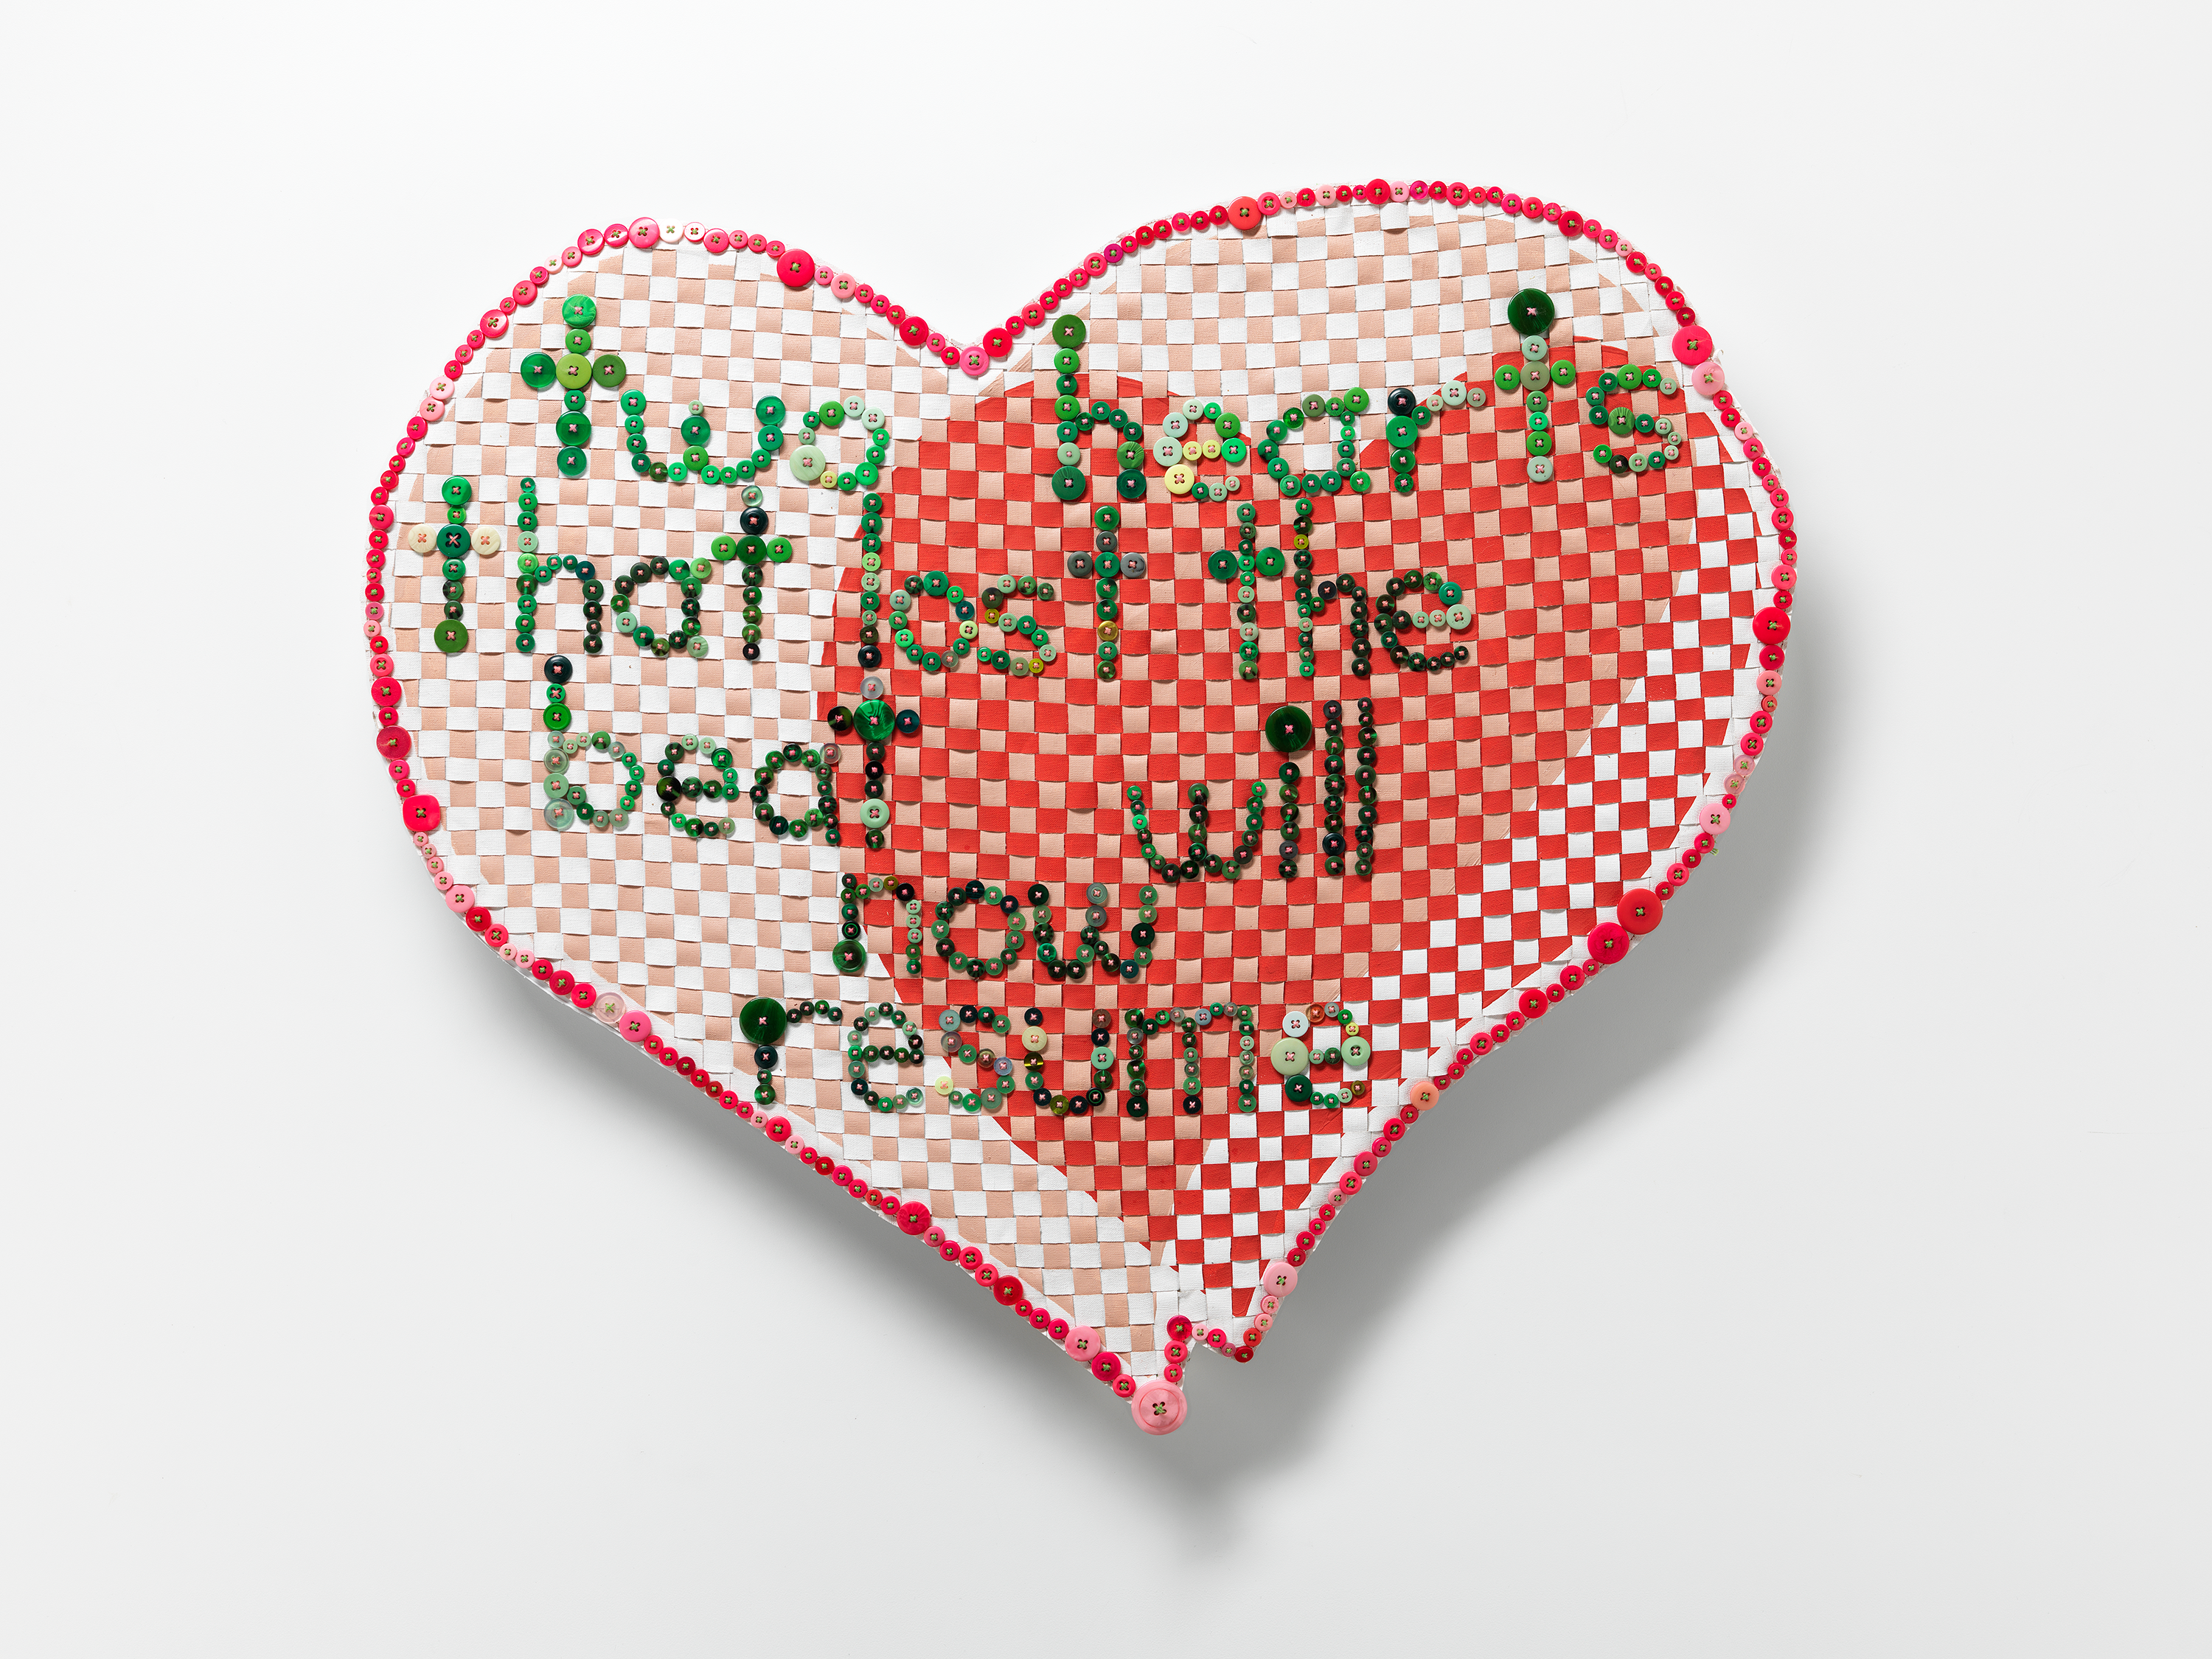 Troy-Anthony BAYLIS, 'Two Hearts (Olivia Newton-John)' 2022, sliced and rewoven acrylic on linen, embroidery cotton, buttons. Courtesy of the artist. Photo: Grant Hancock.